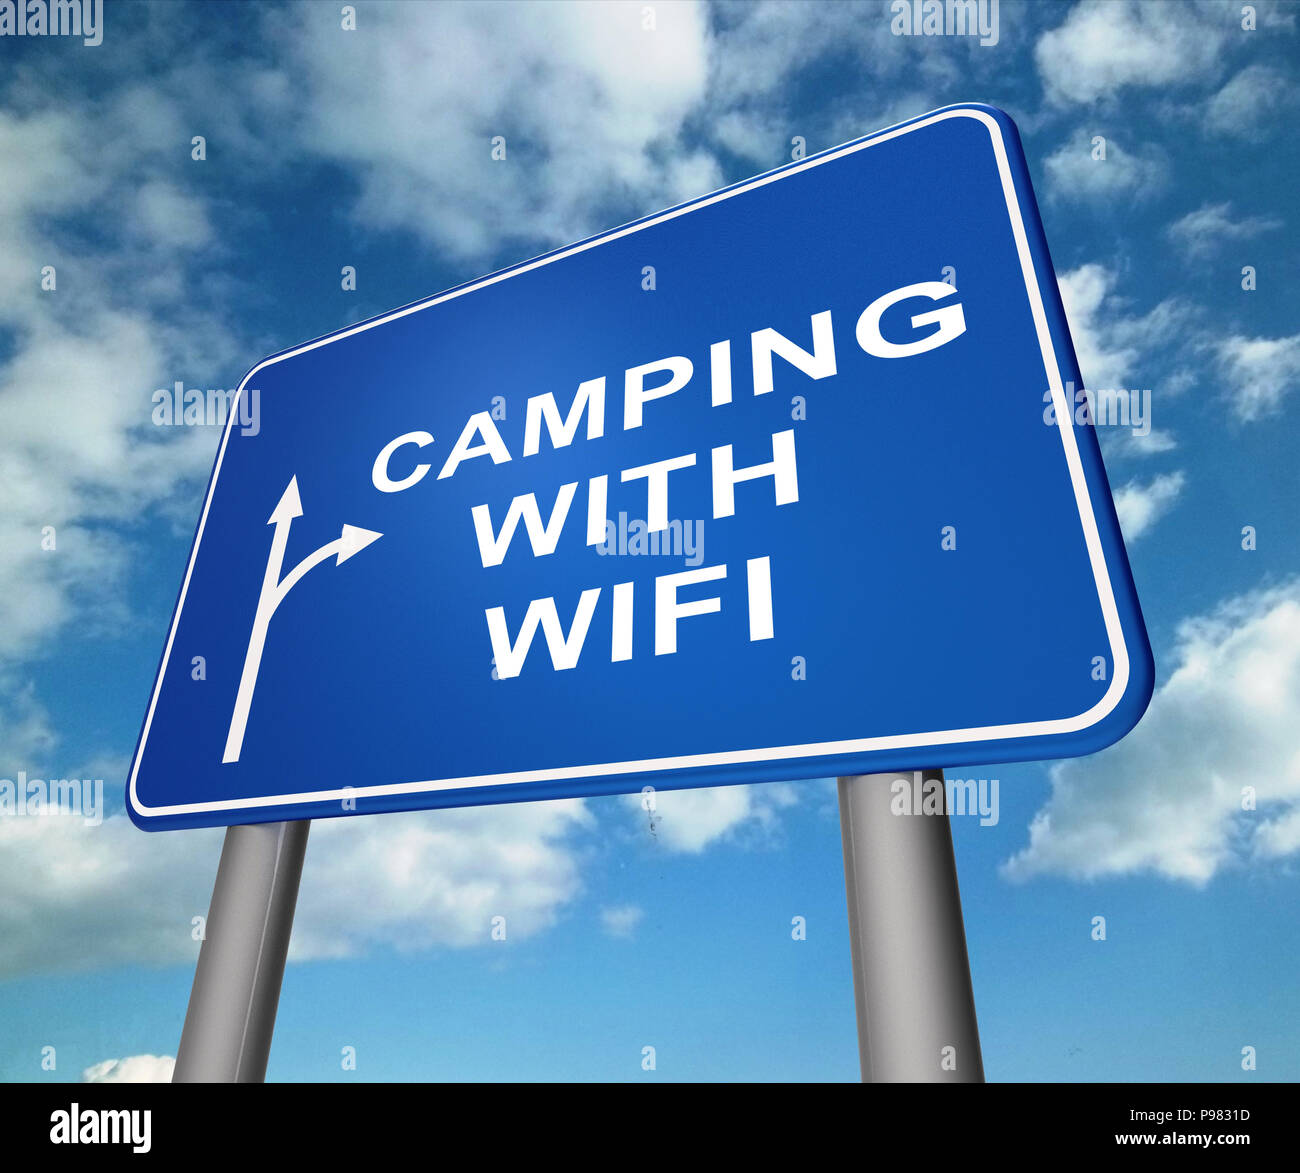 Wifi Camping Internet Access Outside 3d Illustration Means Tourist Travel Campsite Hotspot And Vacation Campground Signal Stock Photo